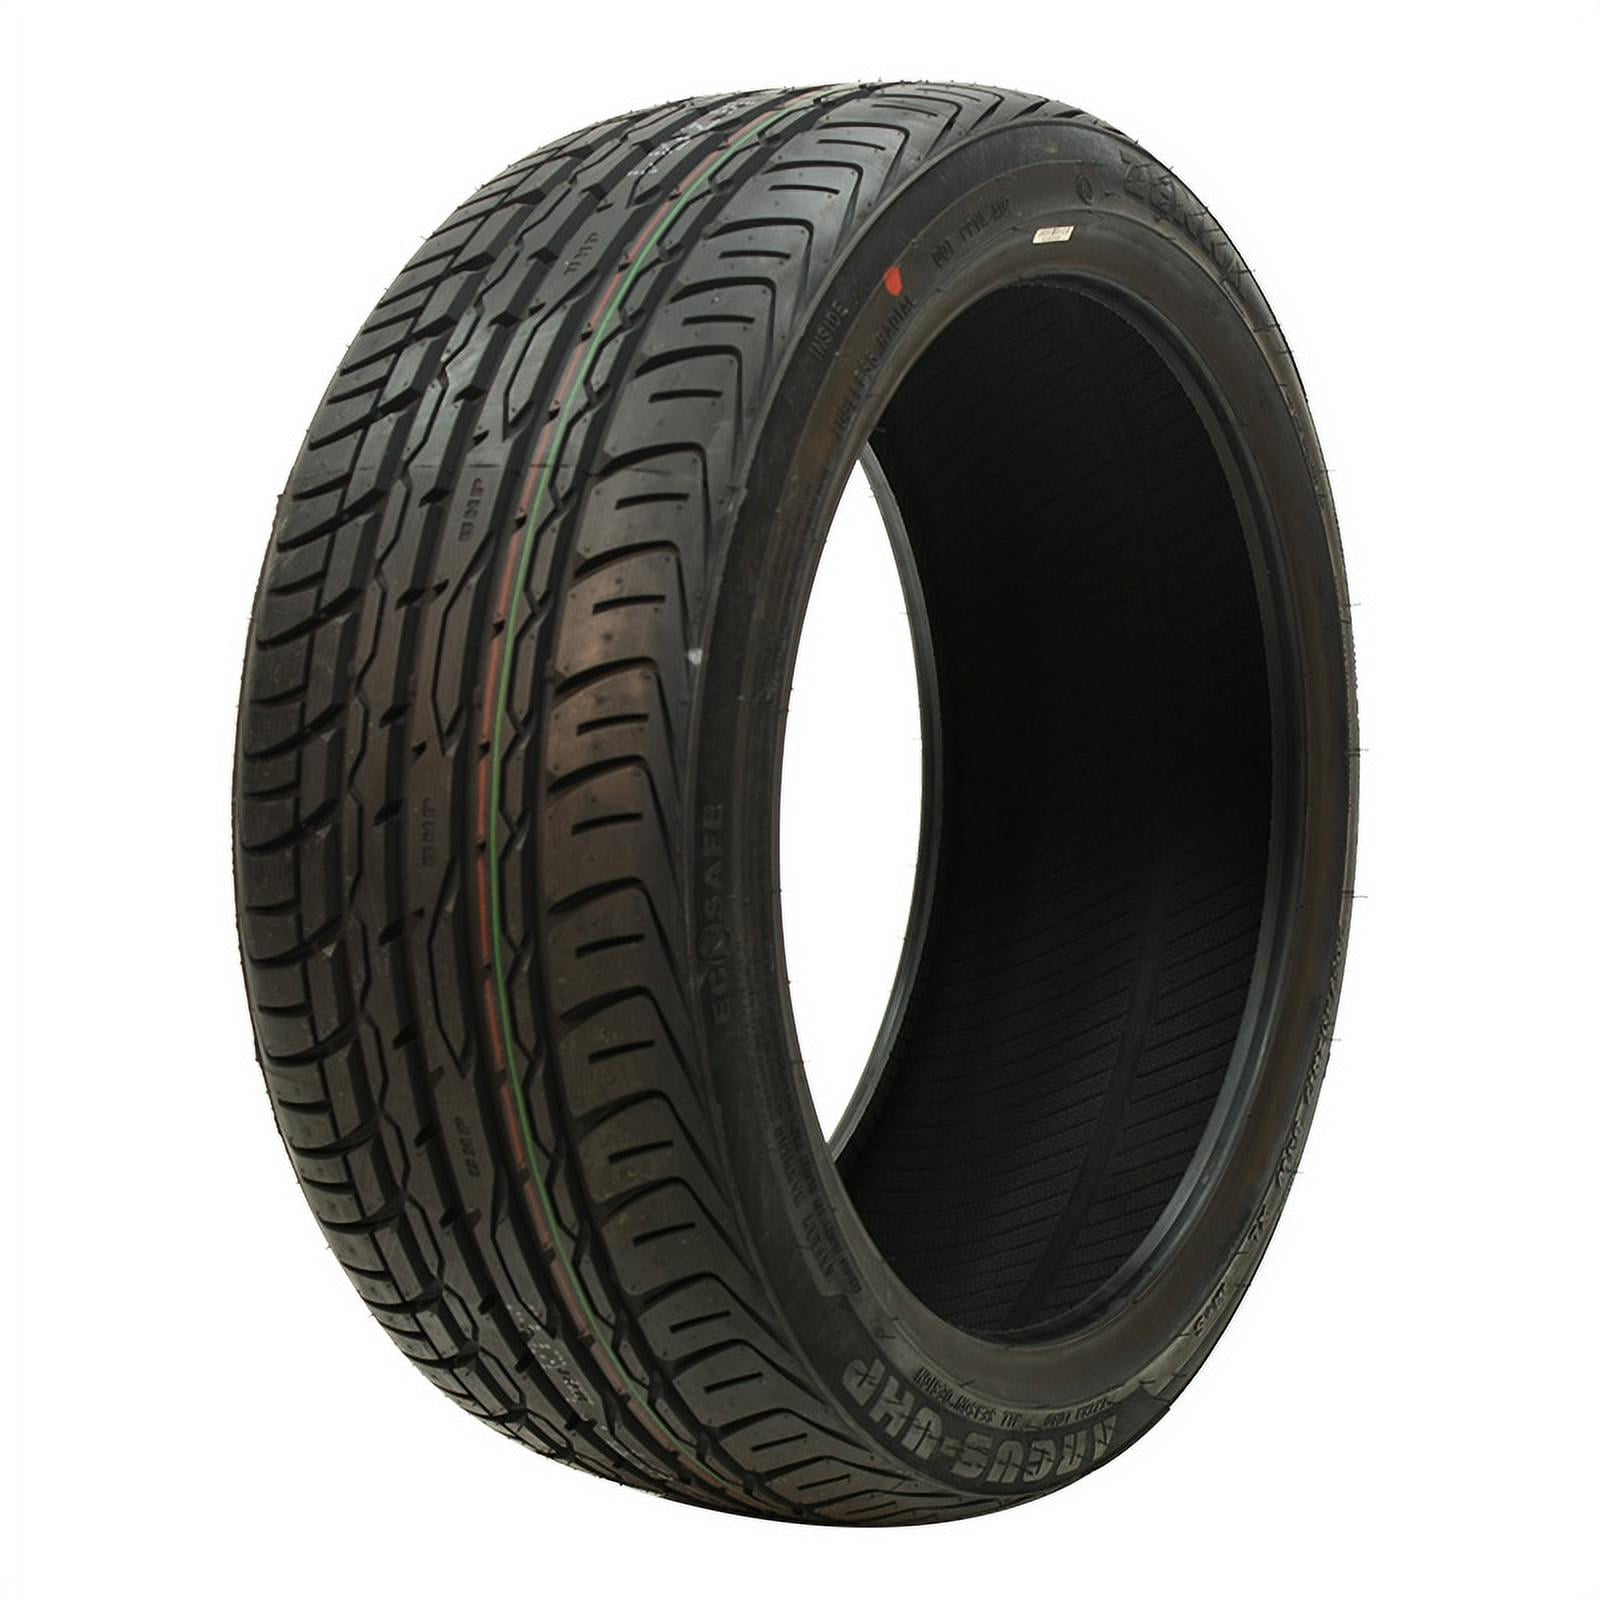 Patriot Tires RB-1 Touring Radial Tire 245/45ZR20 103W 